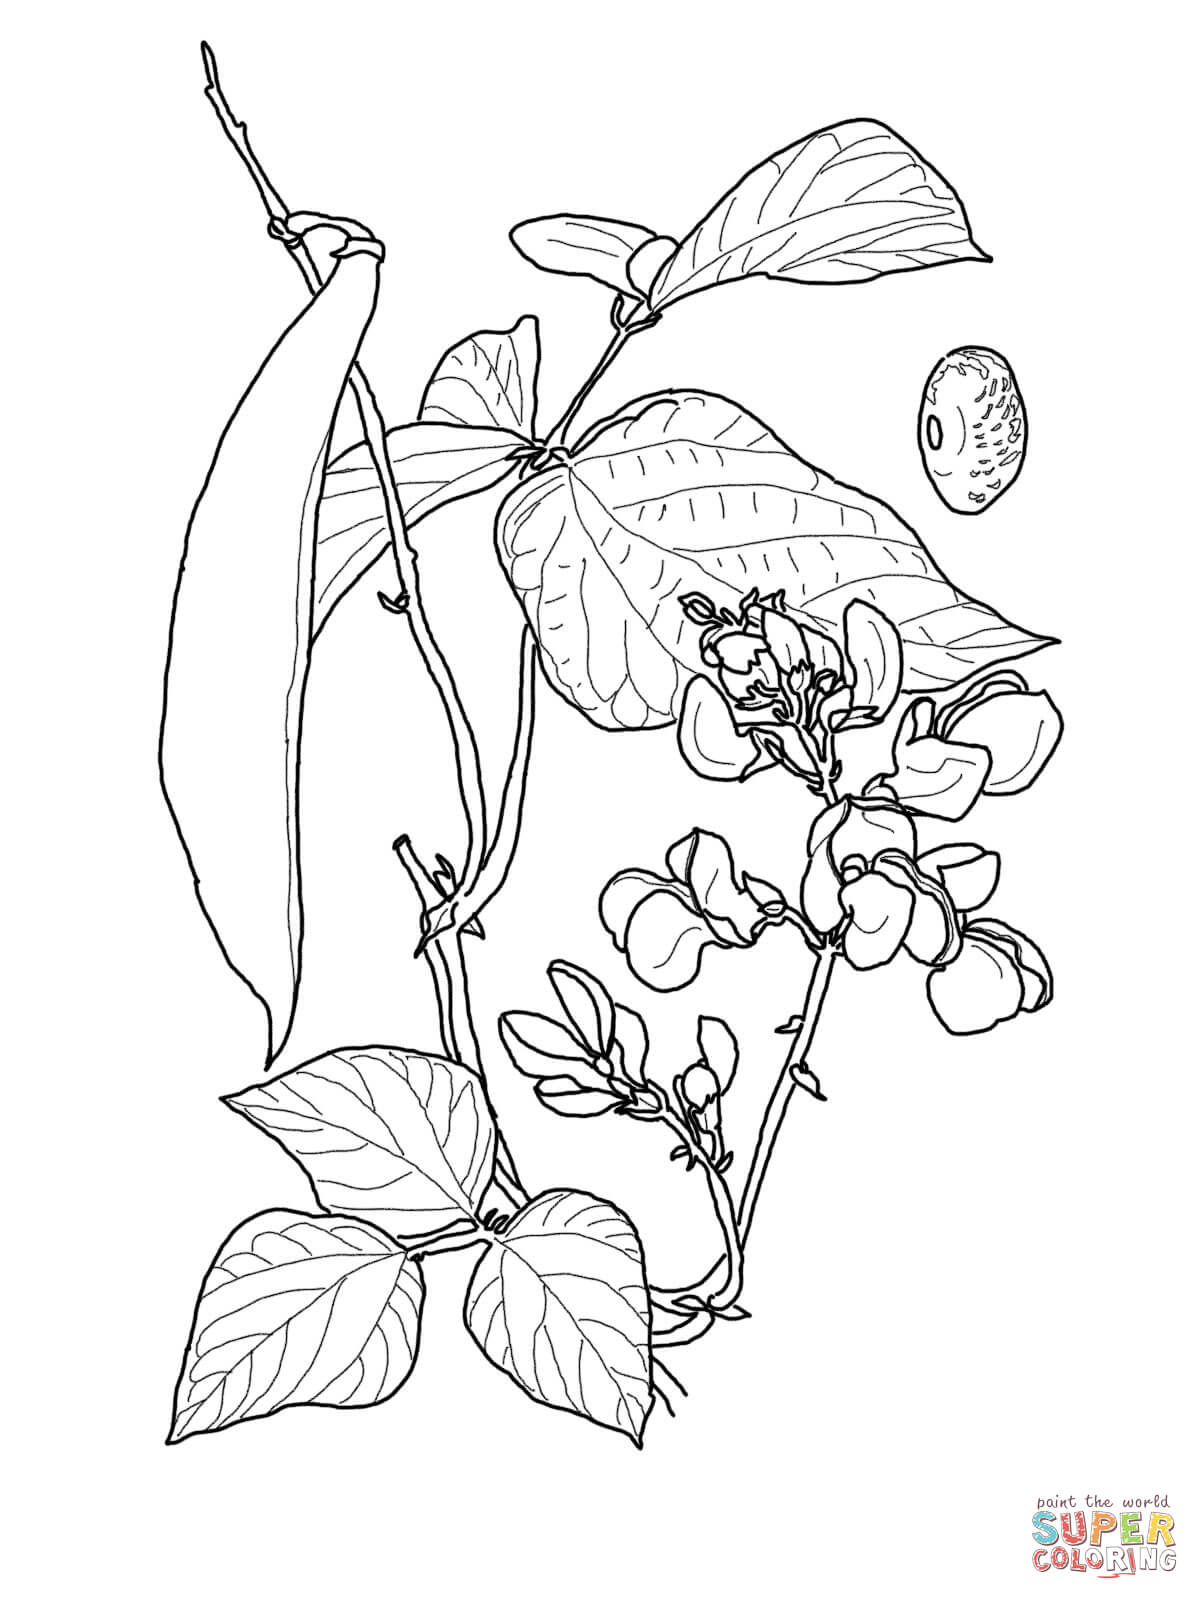 Green Beans Coloring Page Green Bean Coloring Page Free Printable Coloring Pages Coloring Home